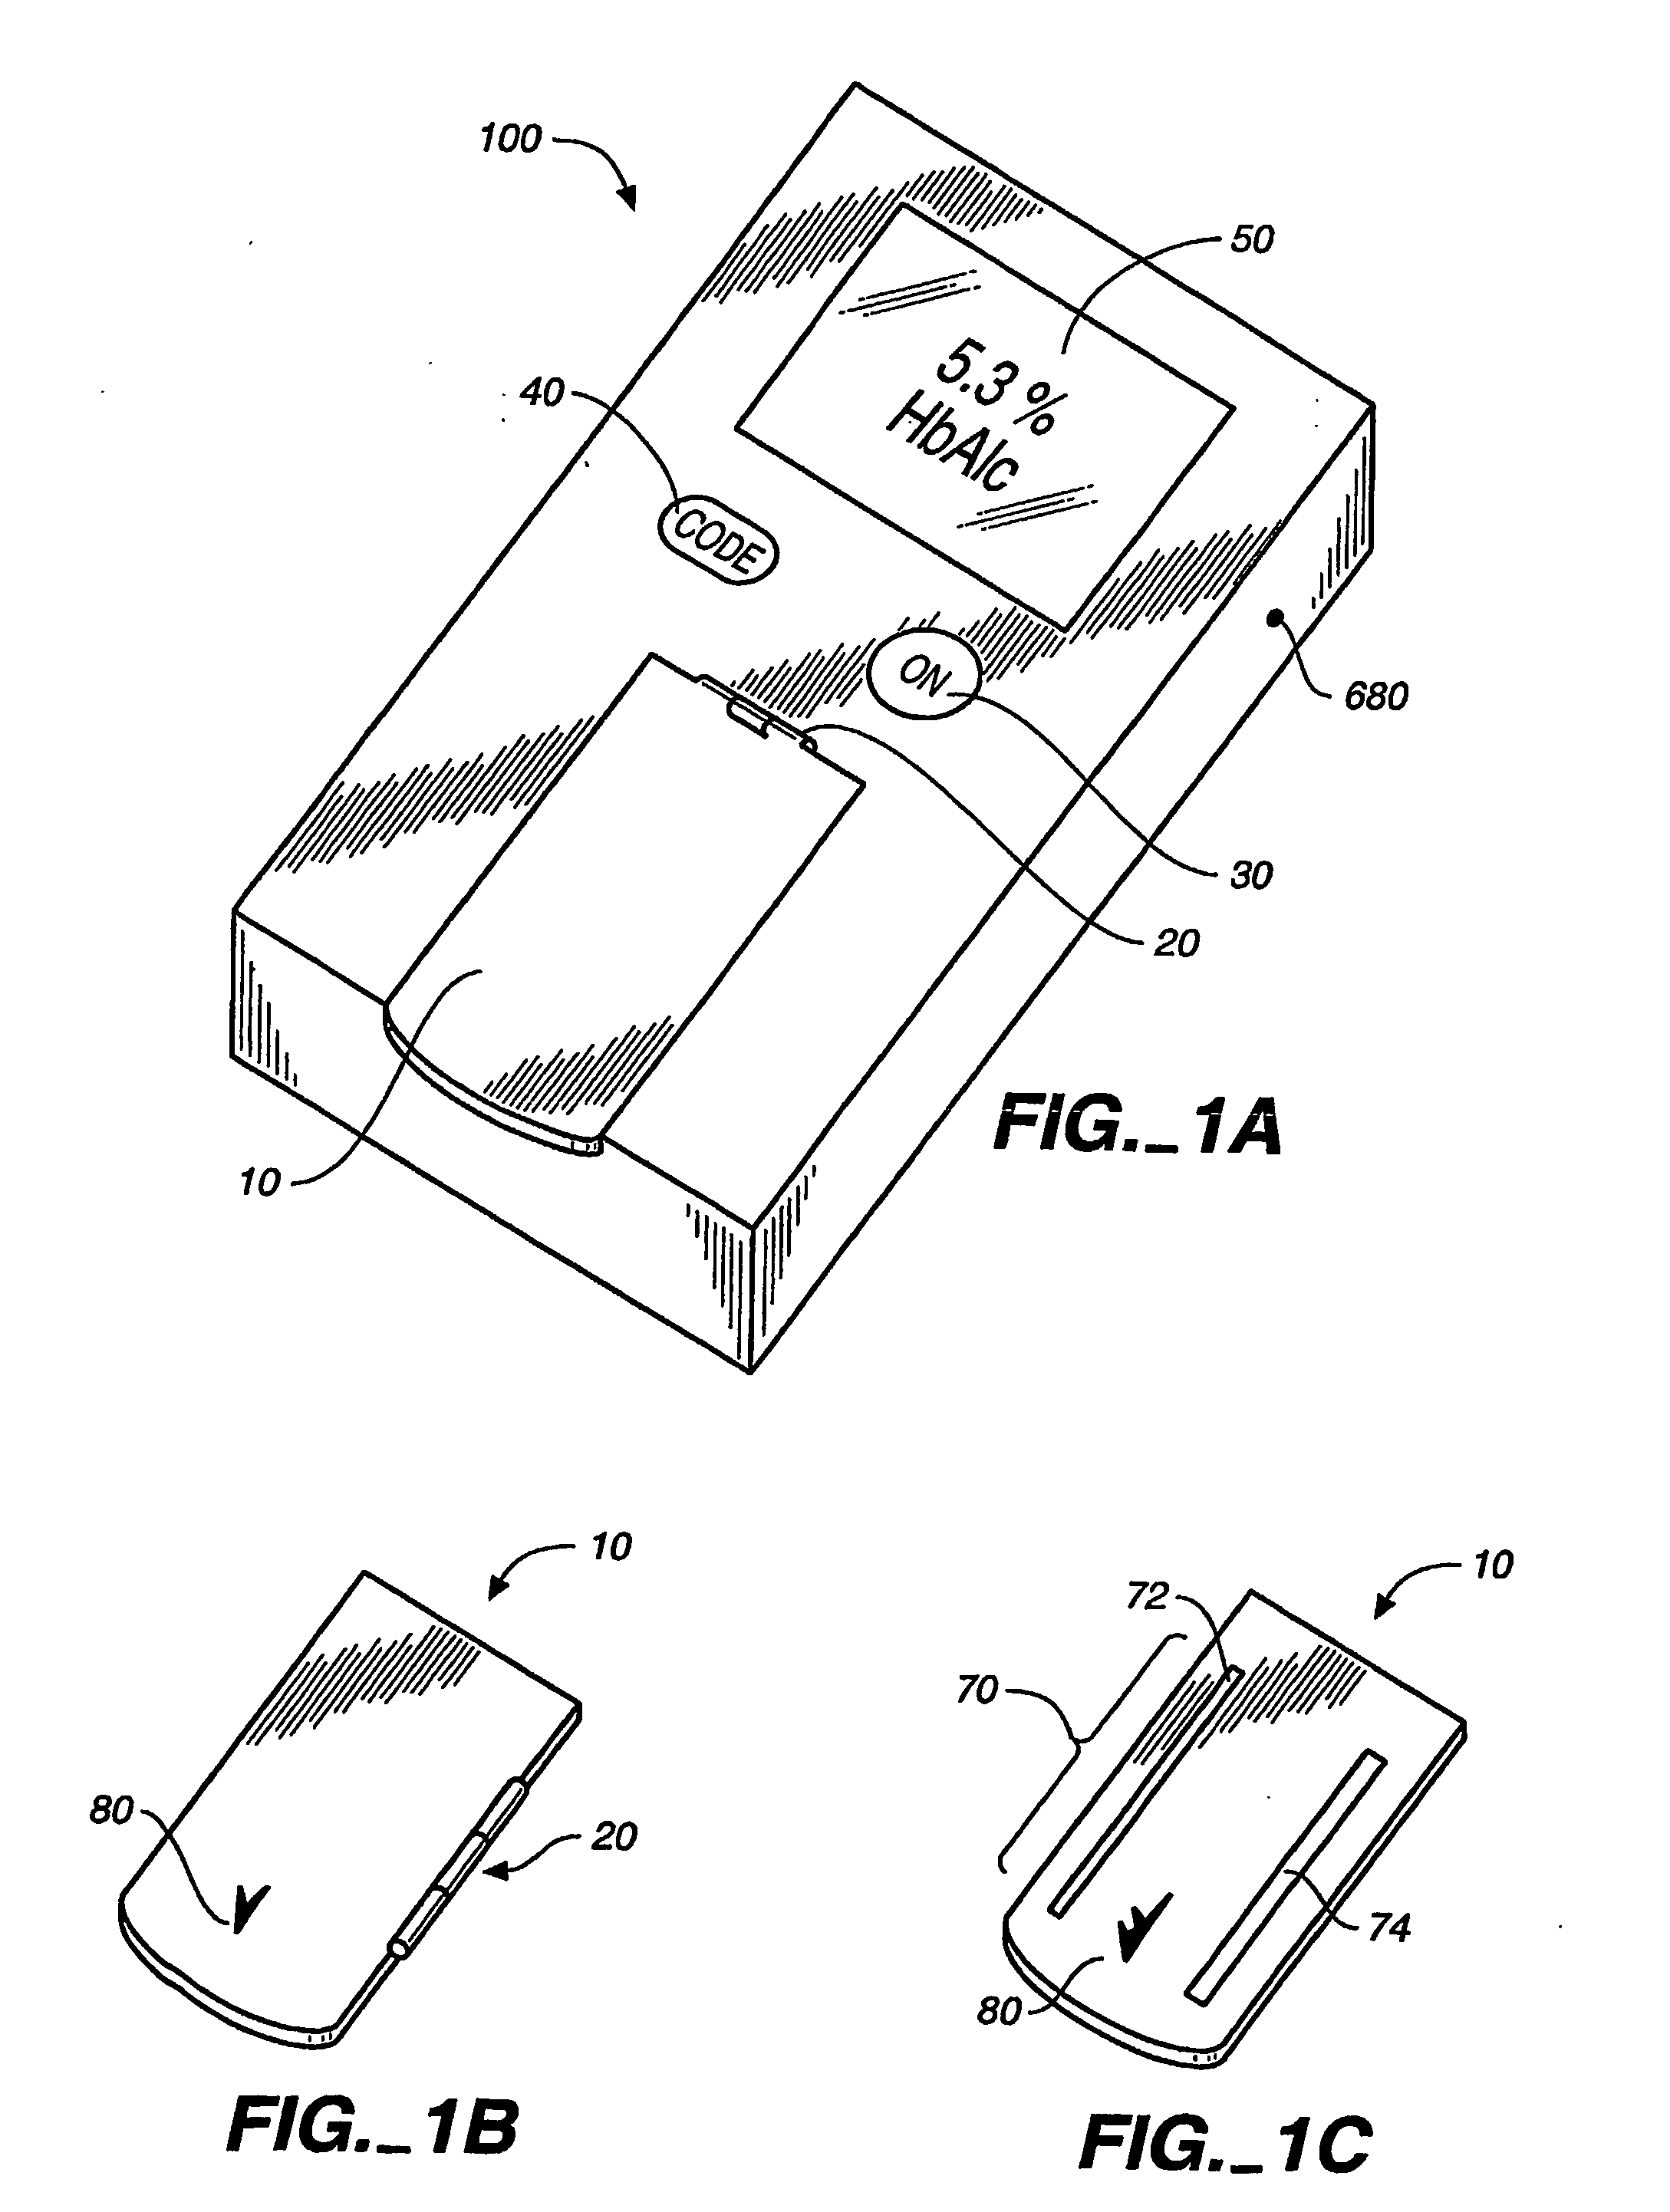 Assay device, system and method